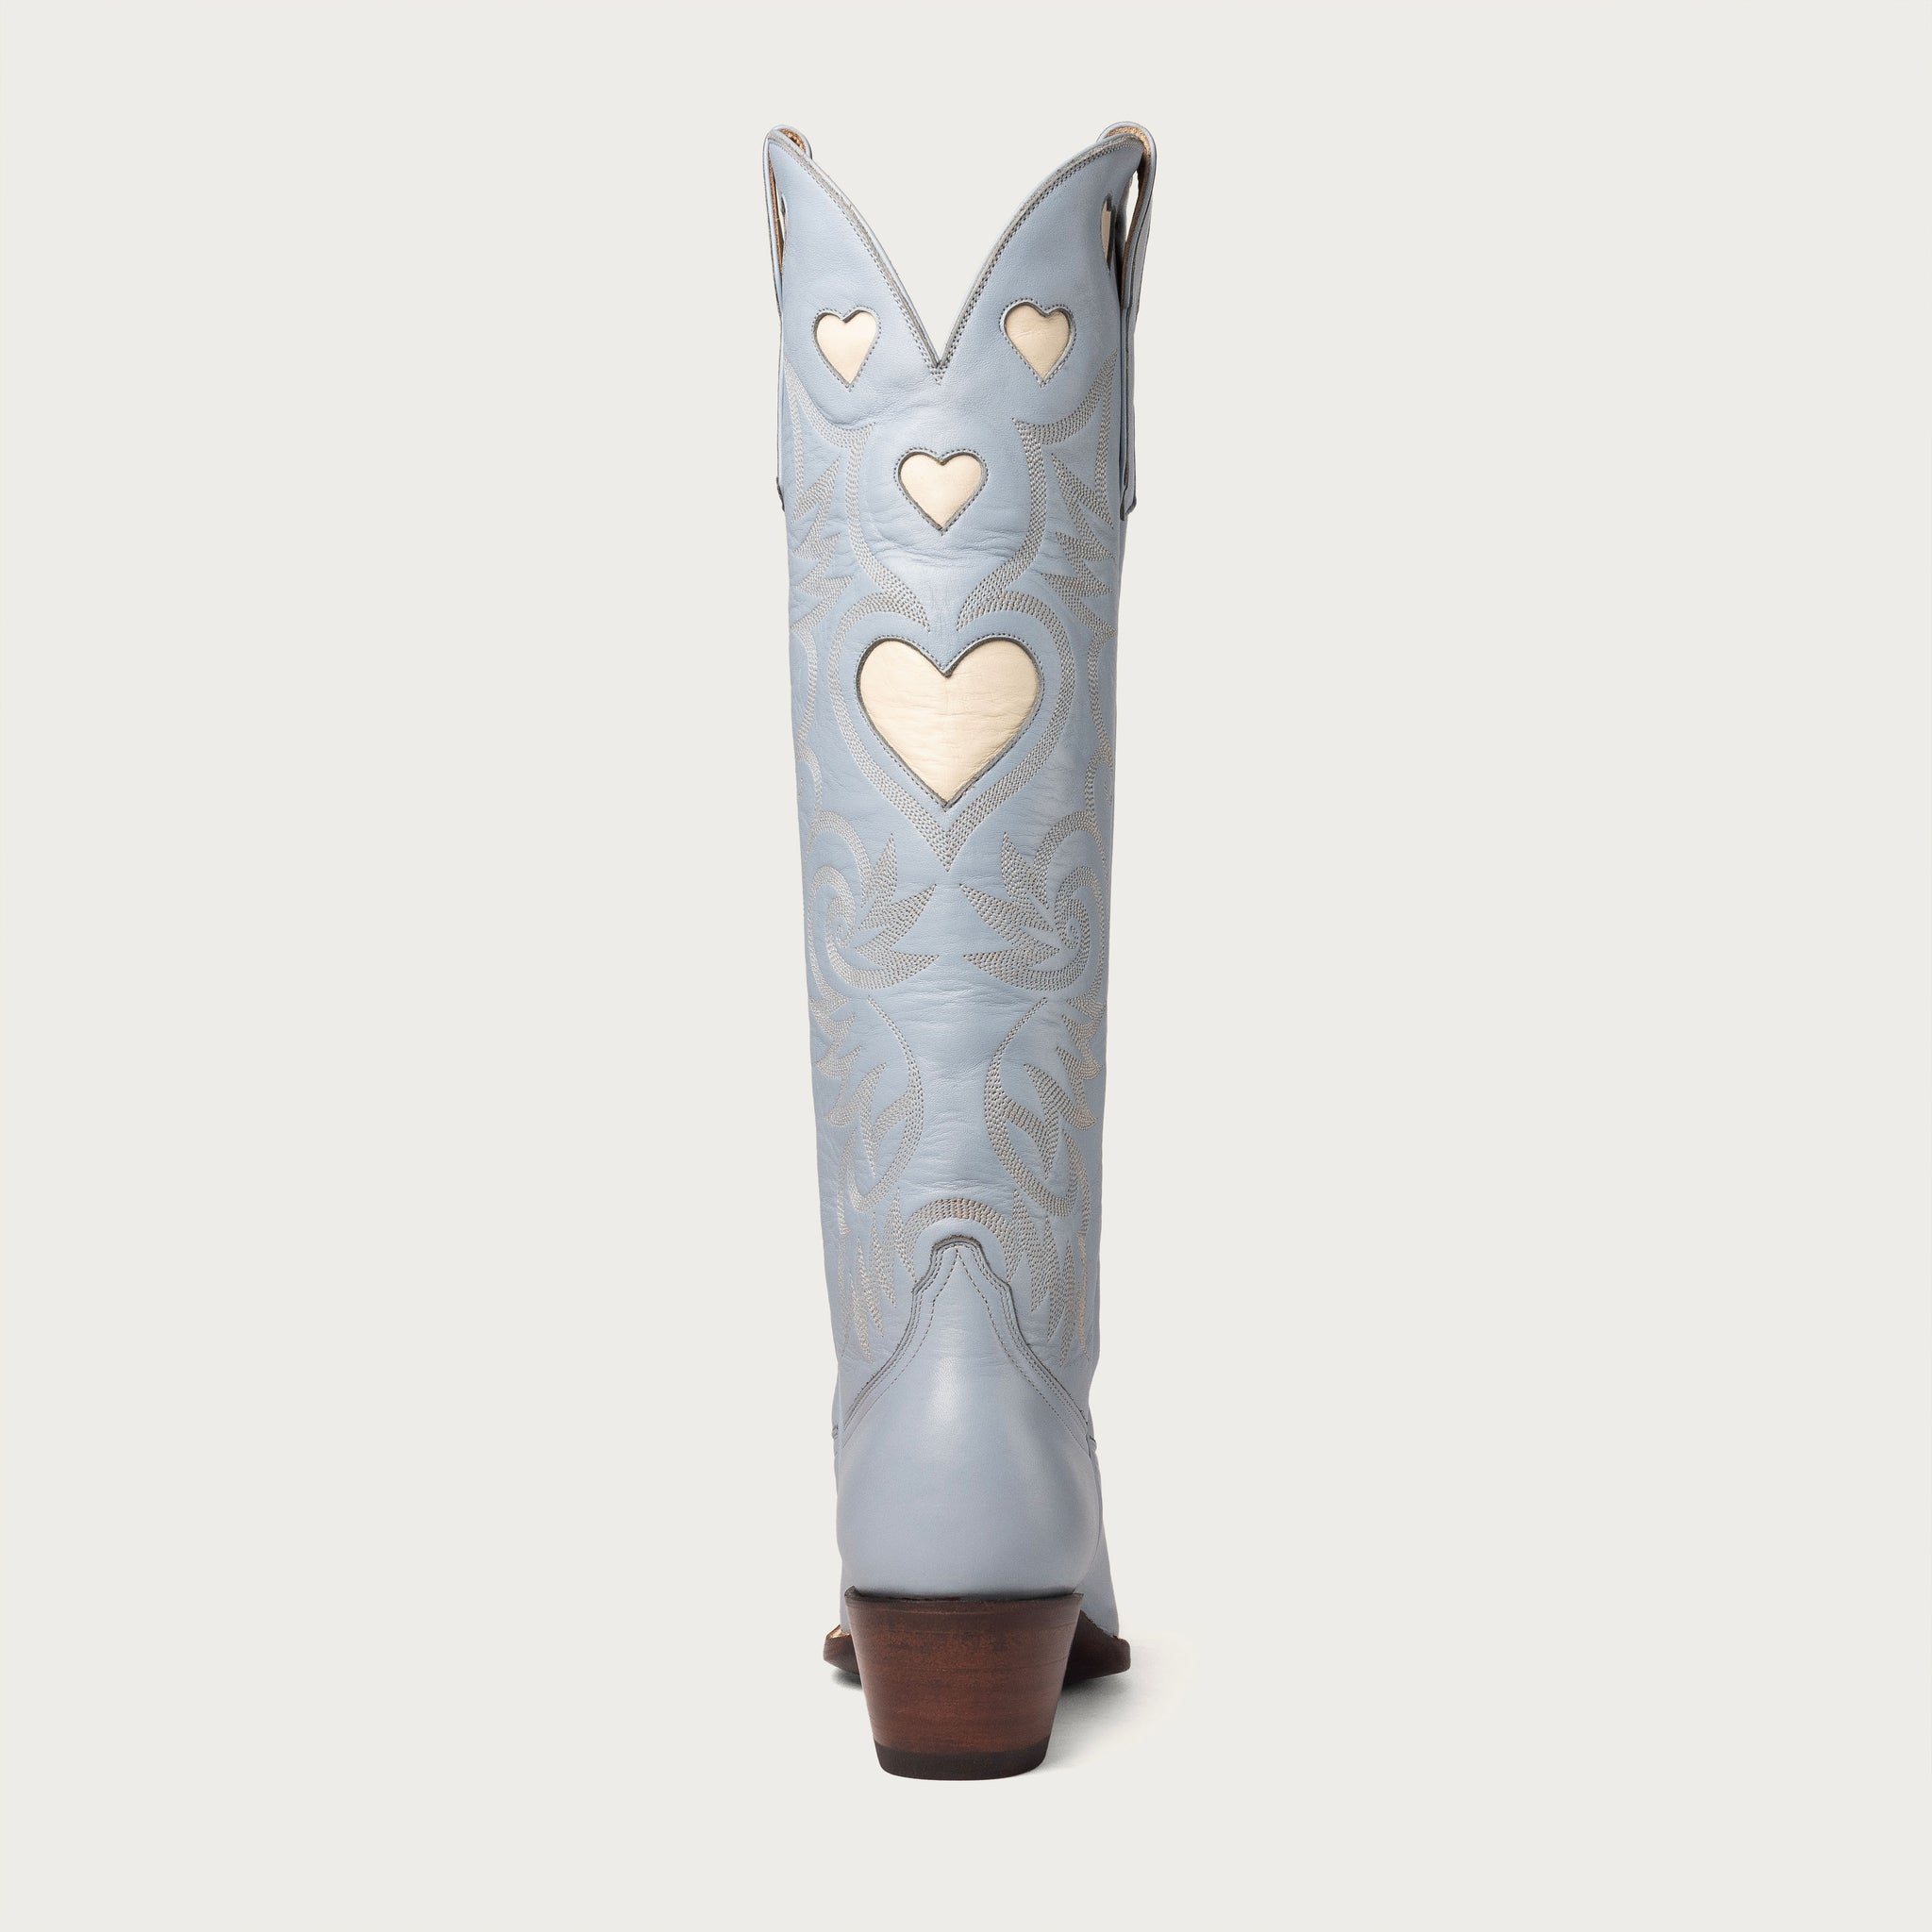 Powder Blue and Bone Heart Boot - CITY Boots